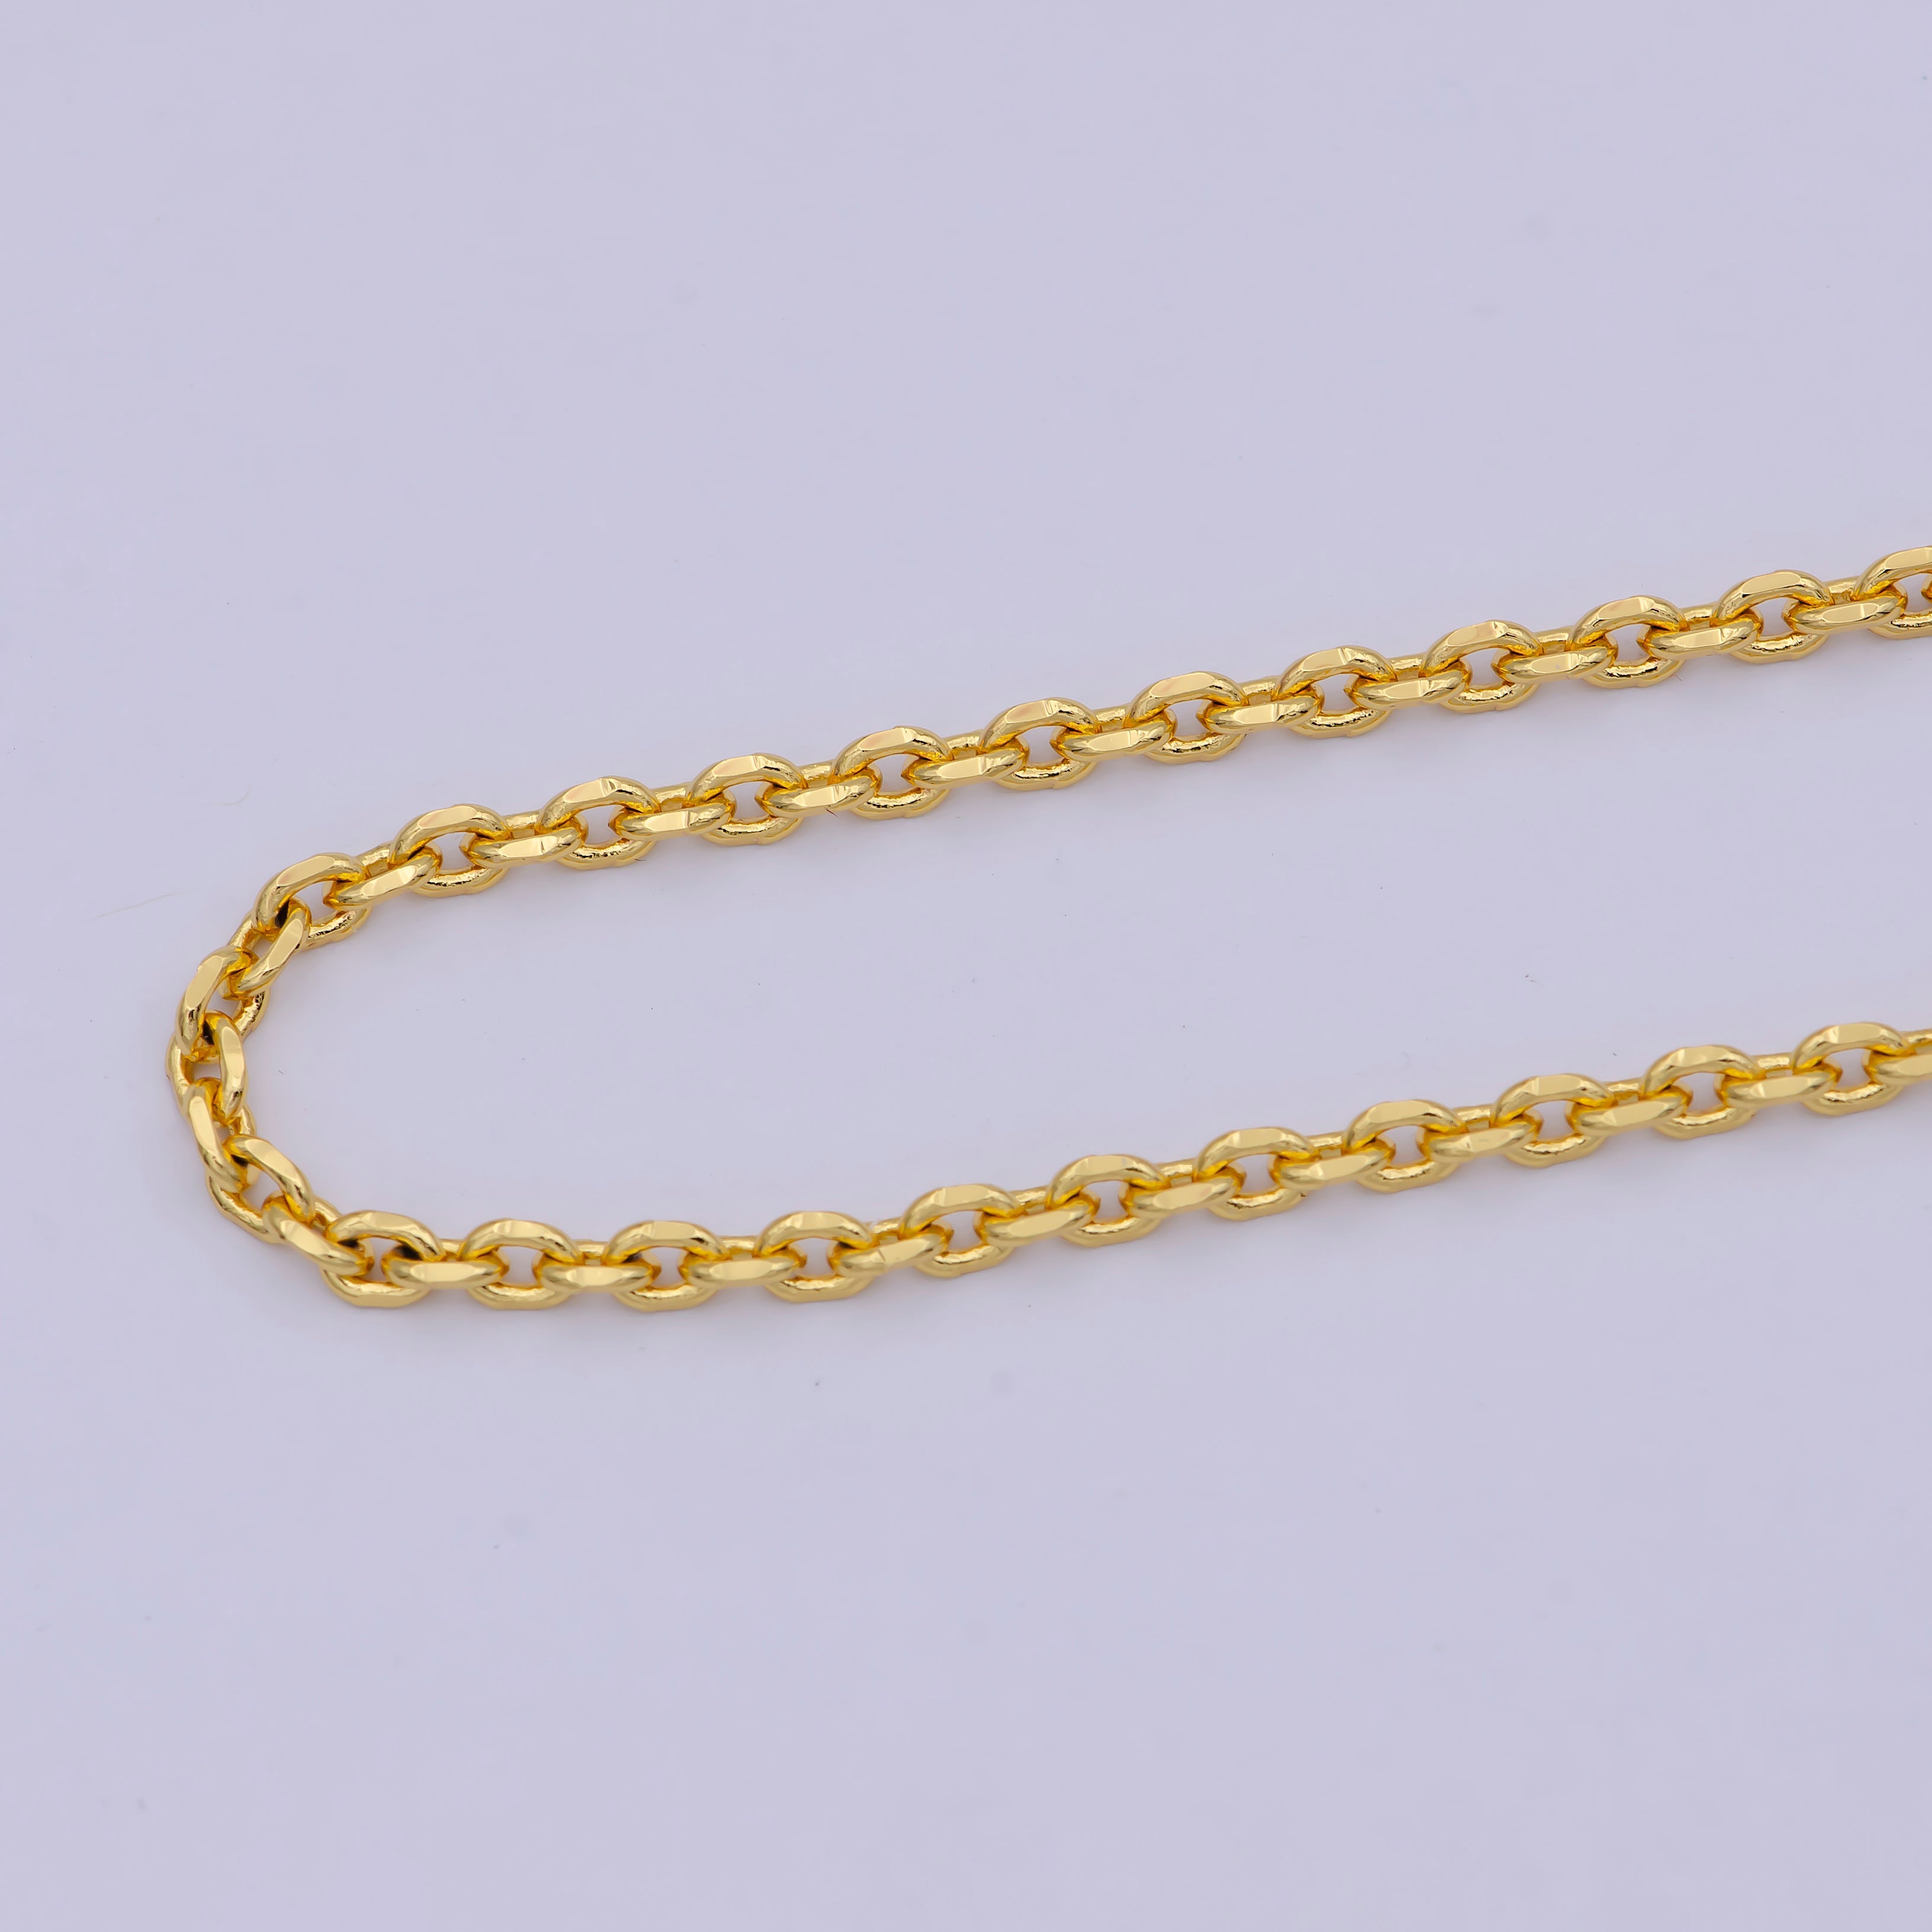 17.7'' Ready to Use 24K Gold Filled Thin Cable Necklace Chain, Layering Cable Chain Dainty Necklace, For Pendant Charm Necklace Making WA-745 - DLUXCA